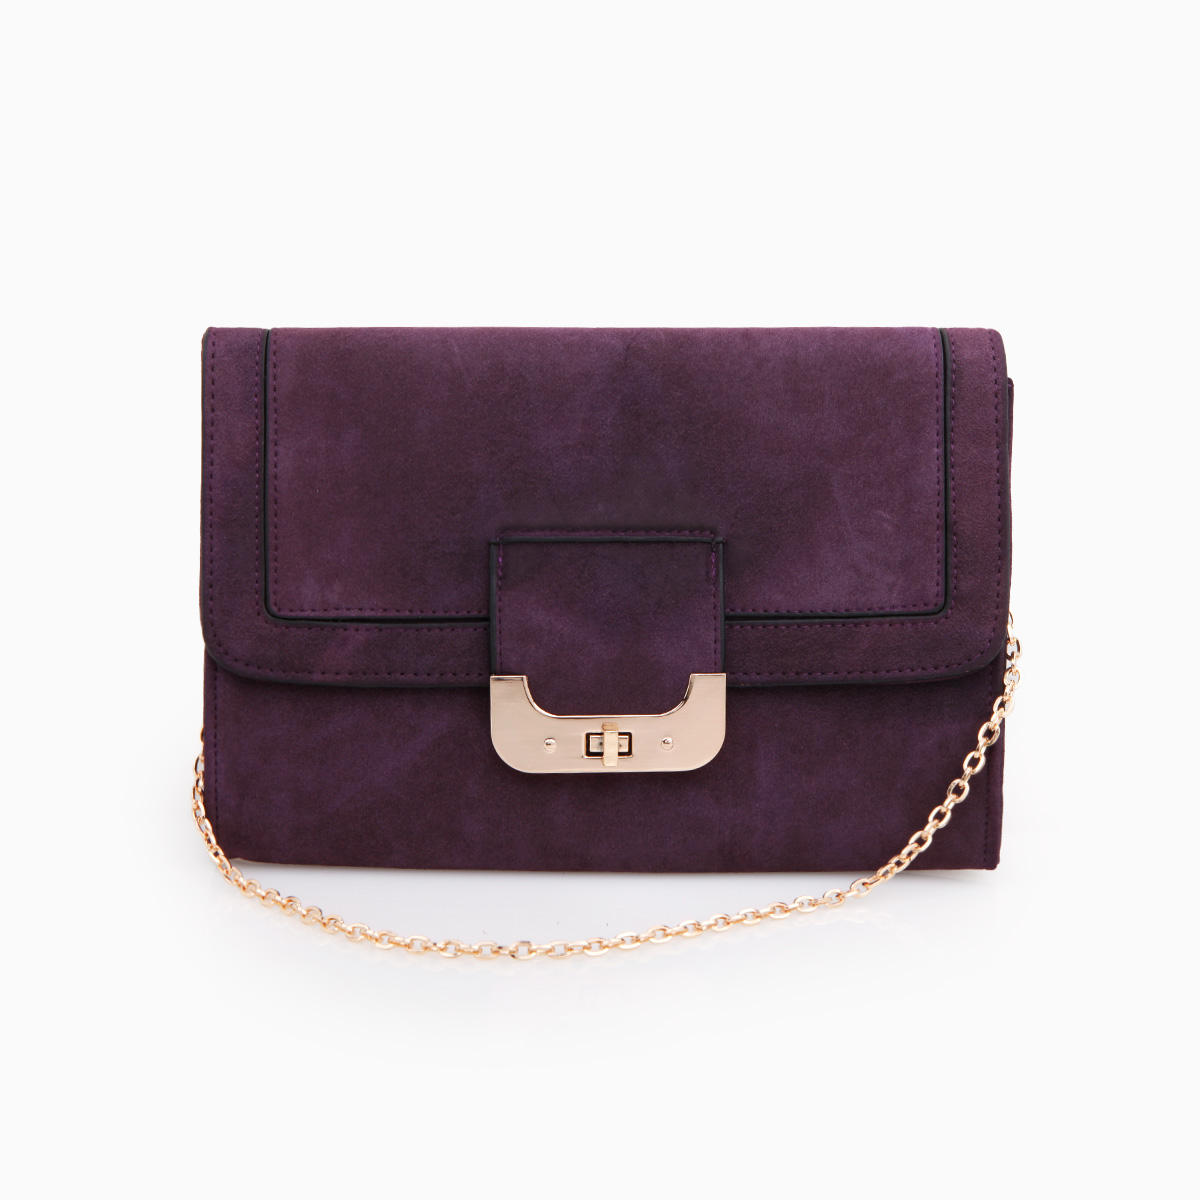 Deep Hue Clutch by Urban Expressions